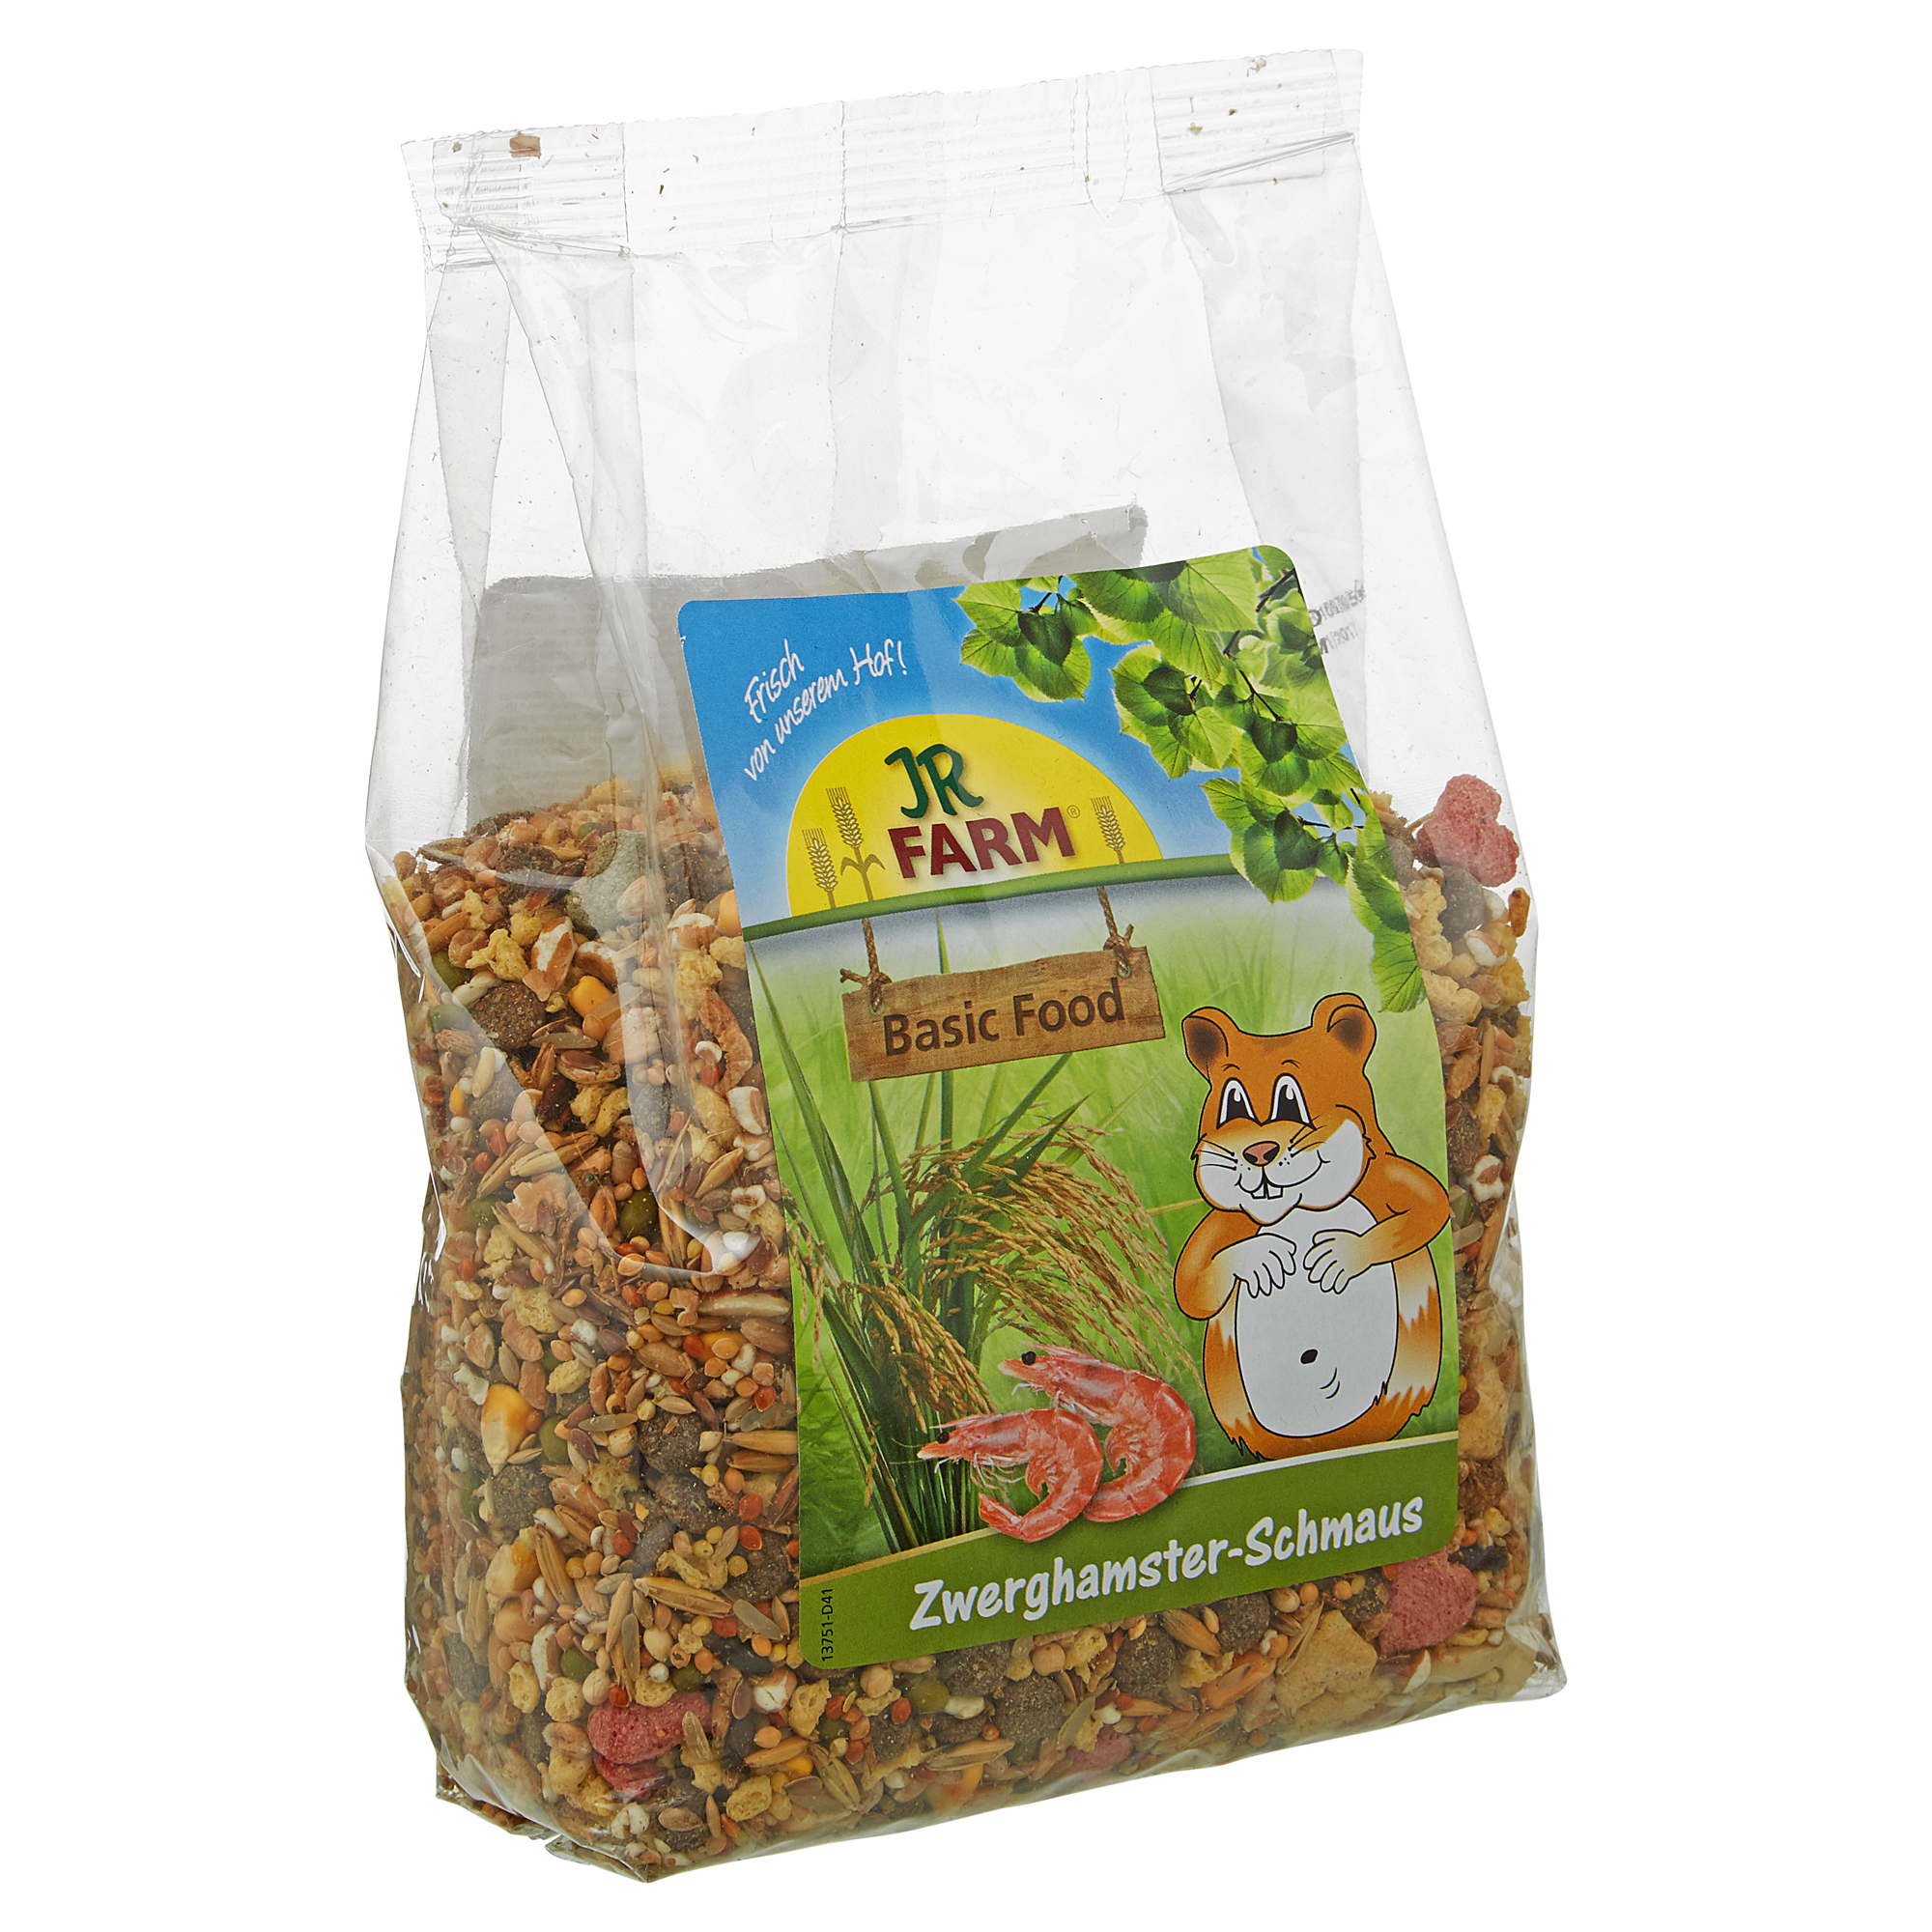 Nagerfutter "Basic Food" Zwerghamster-Schmaus 0,6 kg + product picture